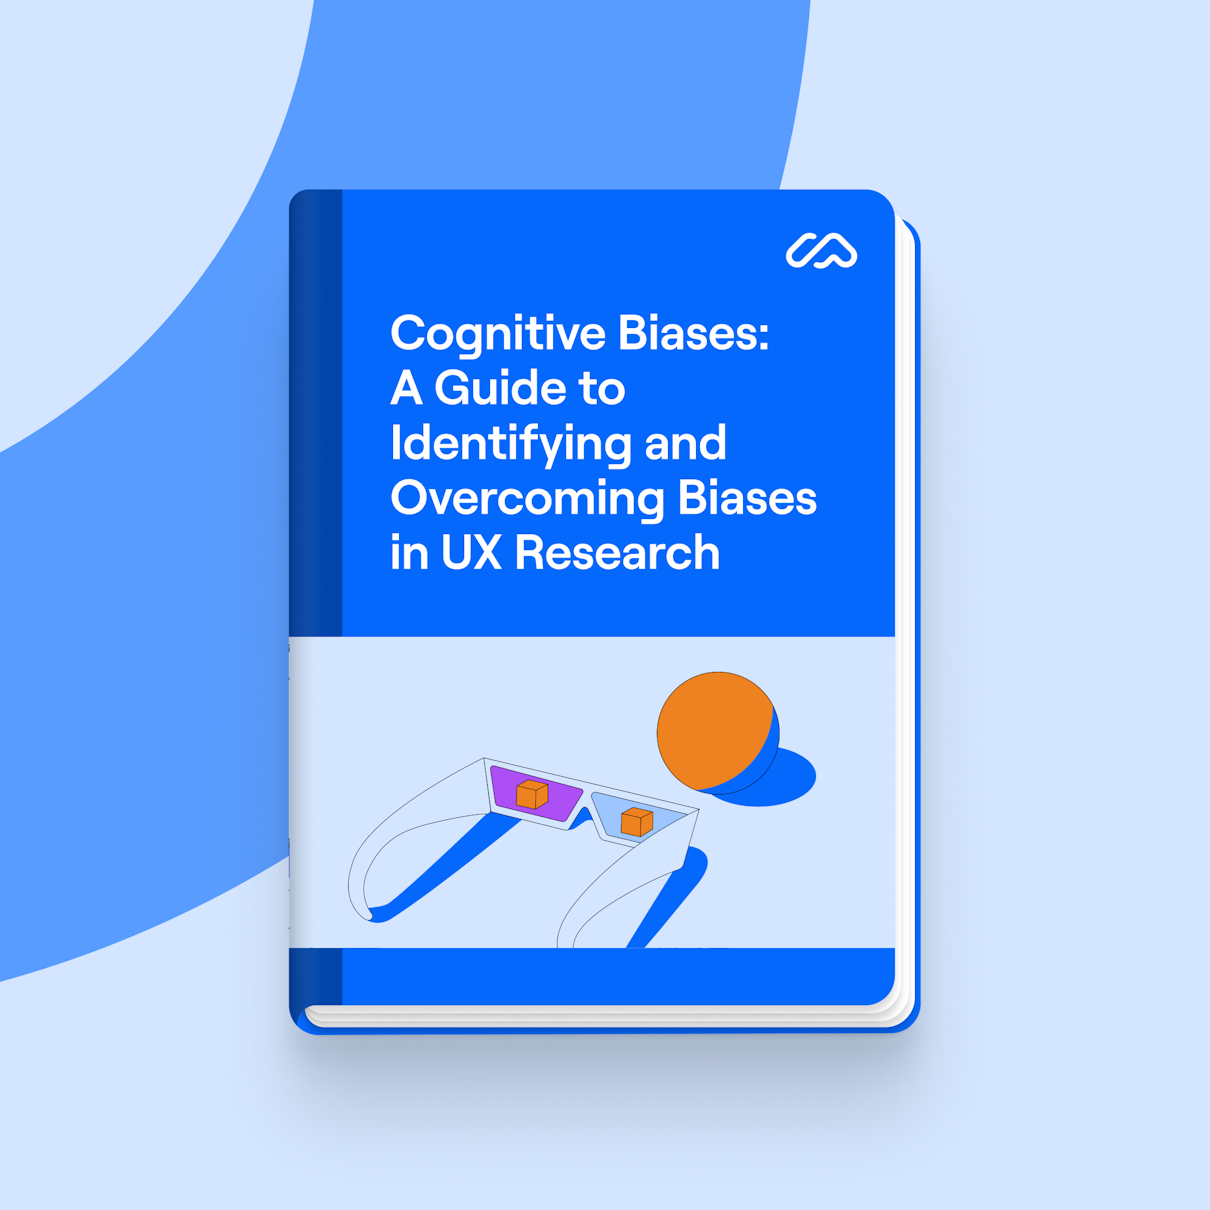 Cognitive Biases: A Guide to Identifying and Overcoming Biases in UX Research